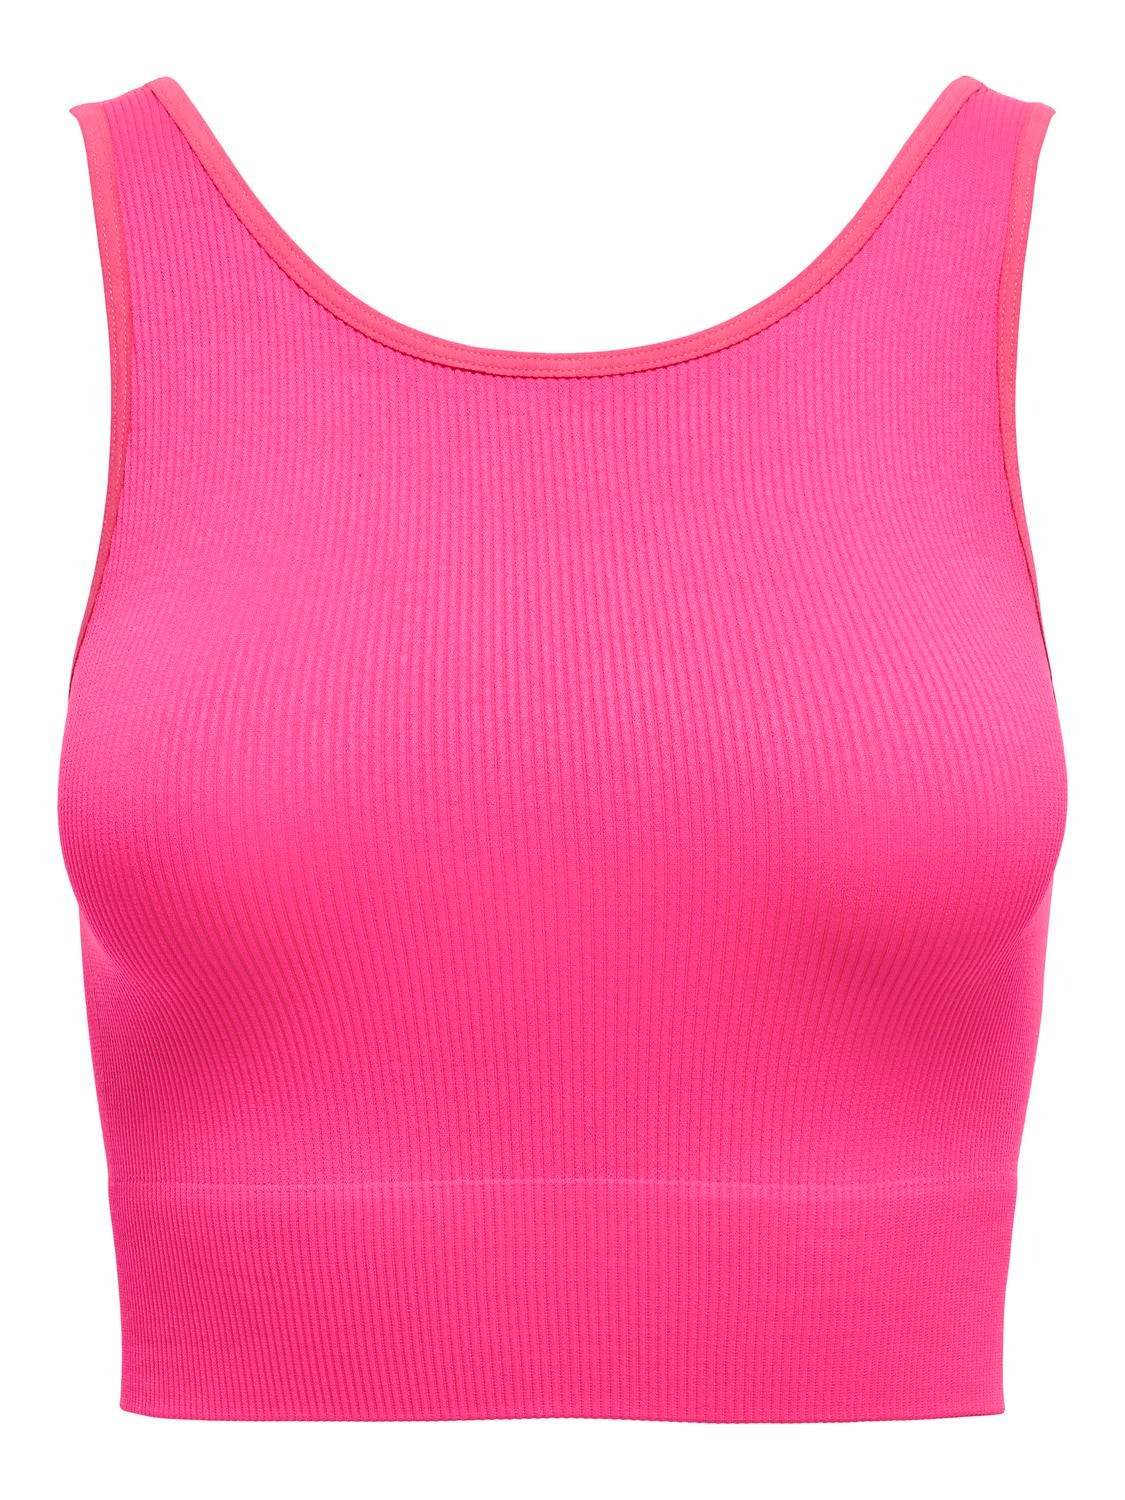 ONLY Seamless Cropped Training Top -Pink Glo - 15250051